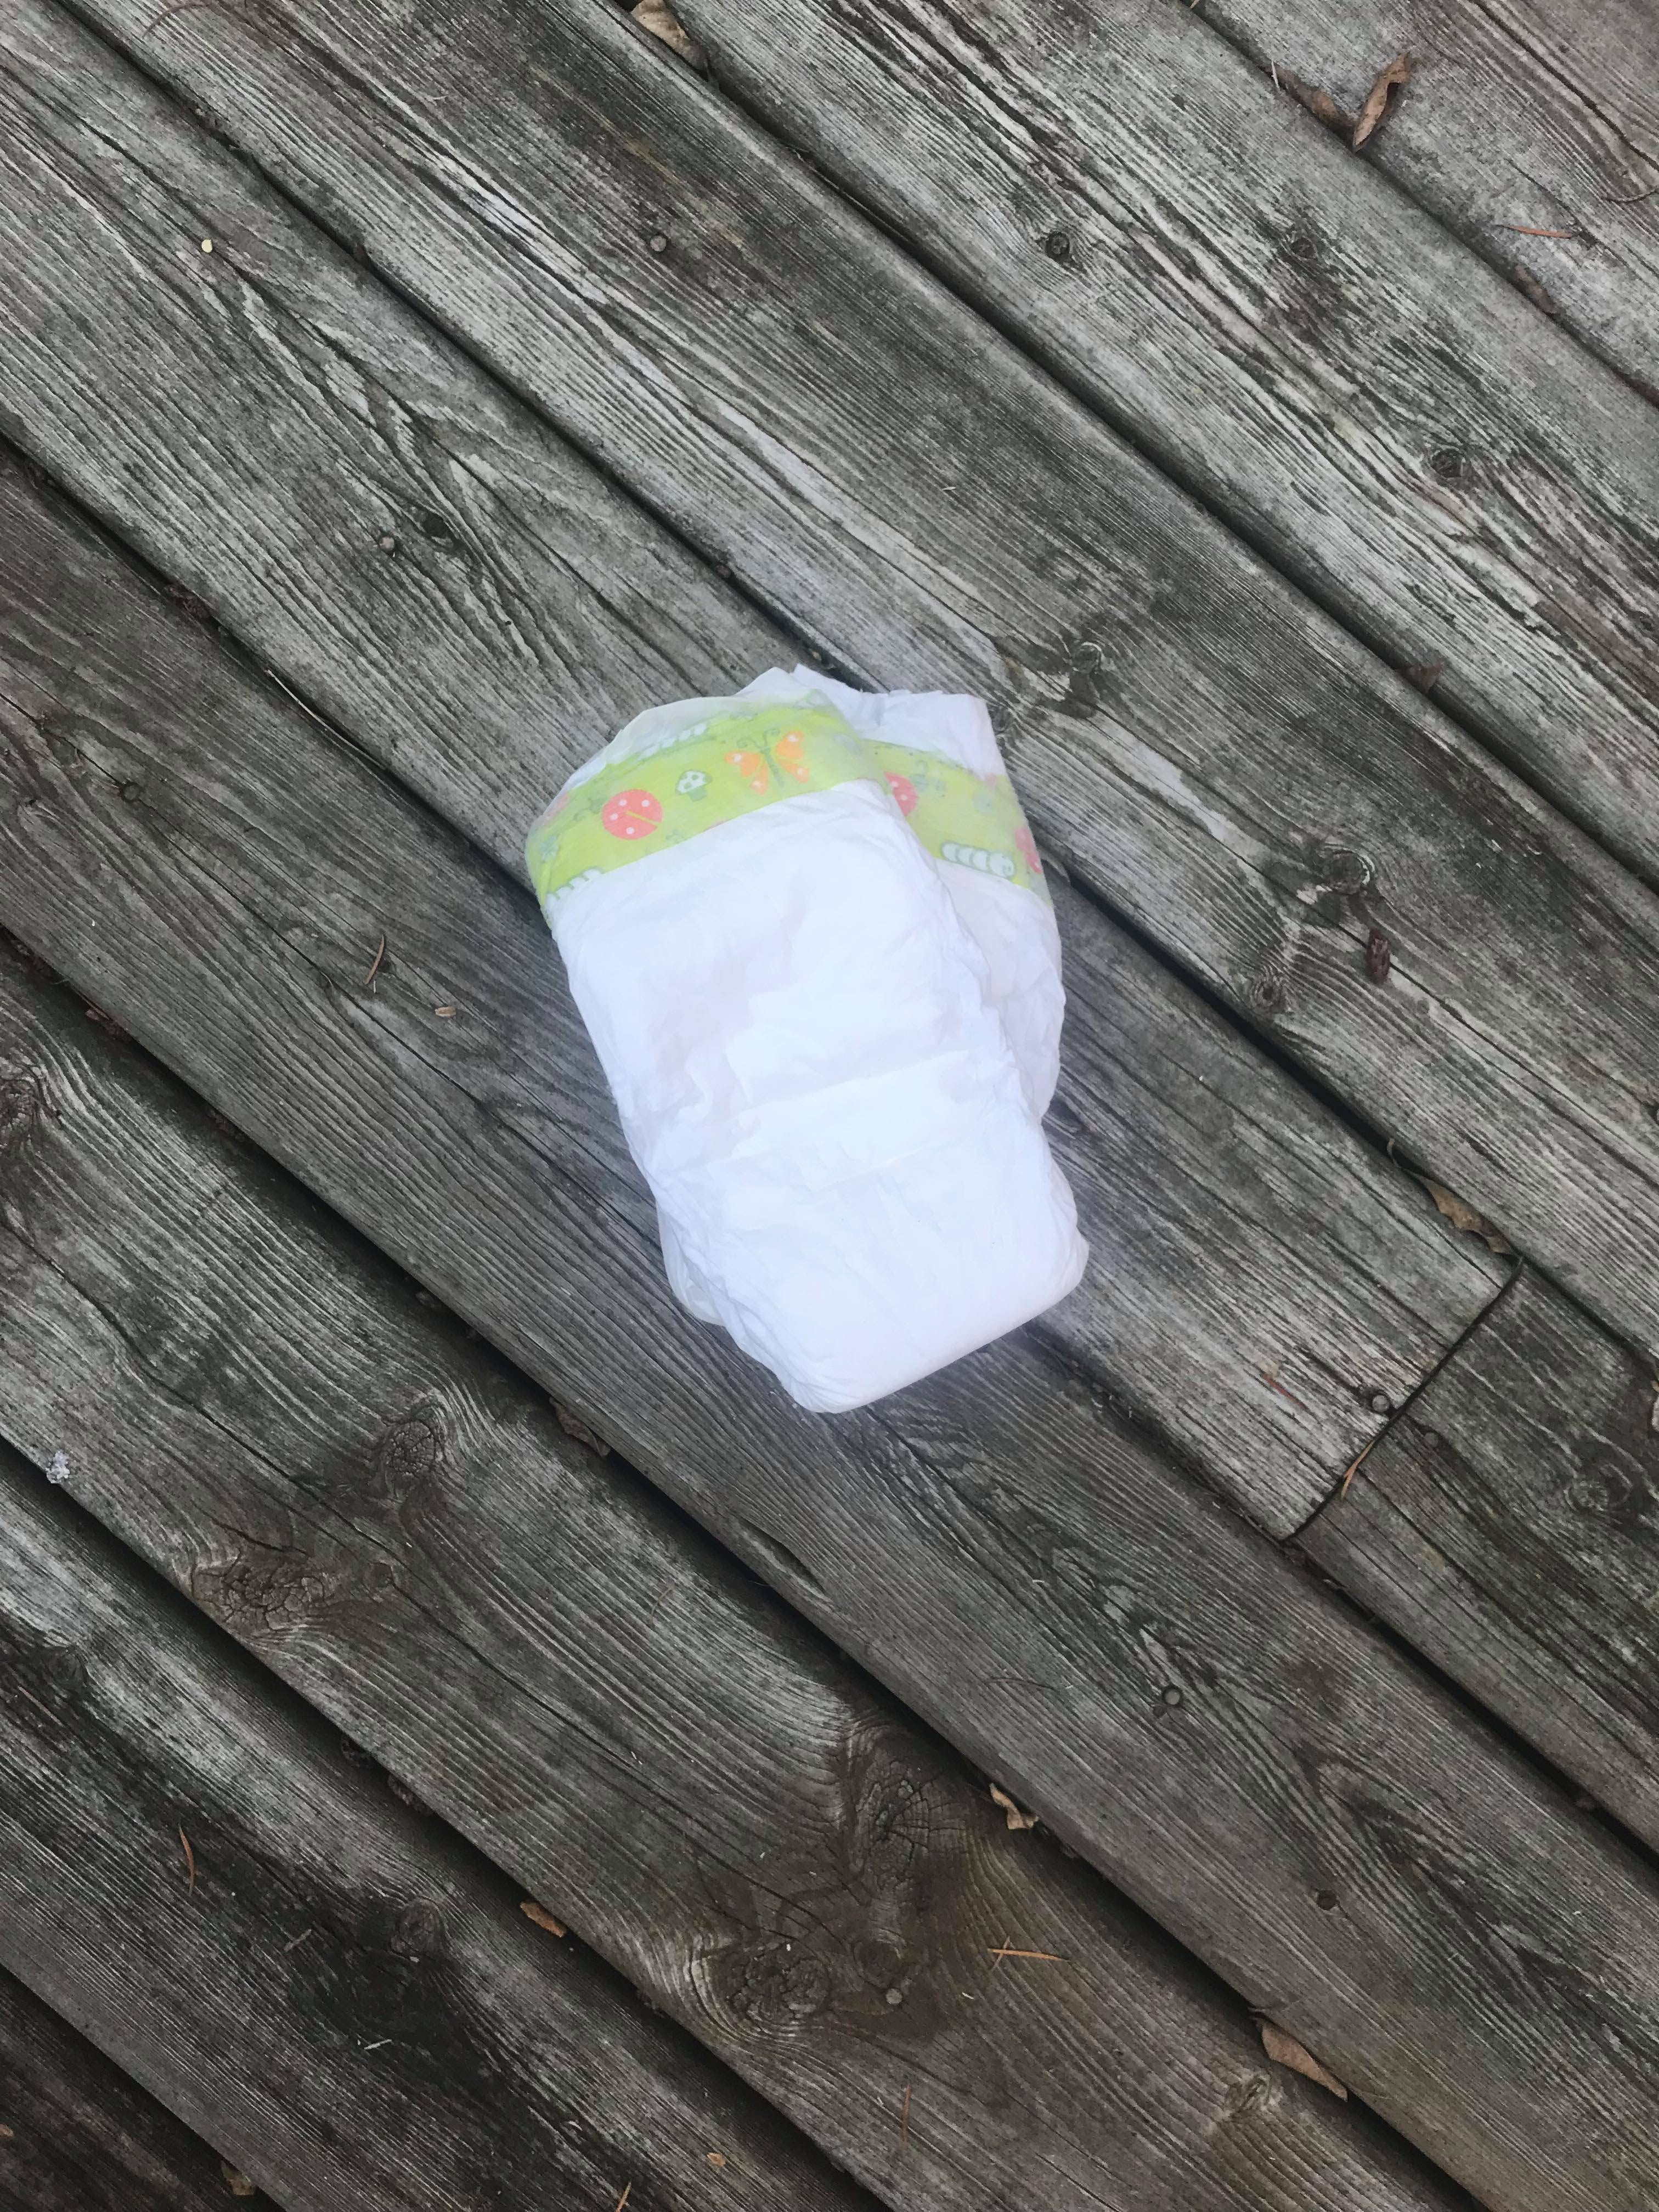 Take diapers on you on your day trips